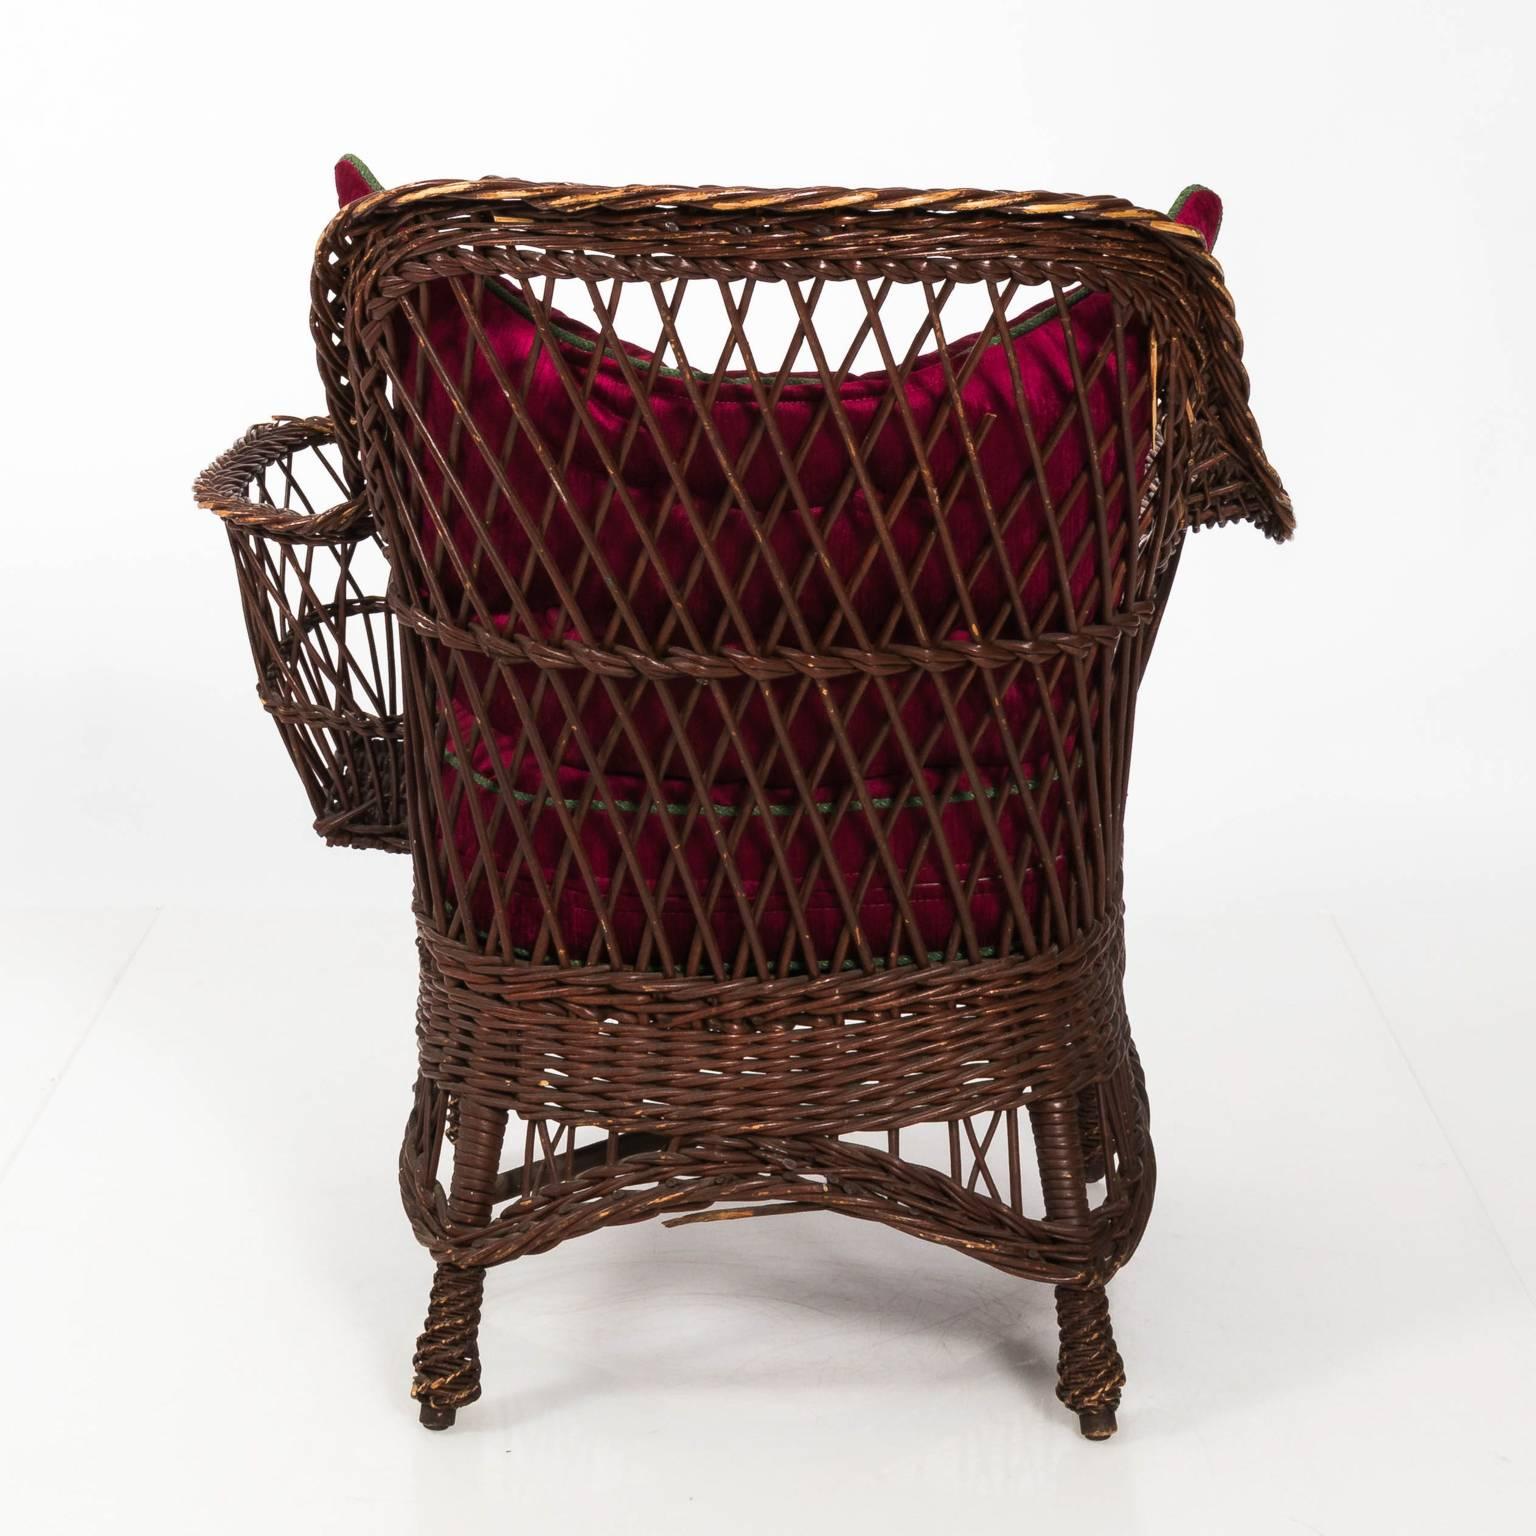 Pair of natural woven wicker American Victorian chairs by Heywood Wakefield and Co. with braided trim and custom red upholstered cushions. One features a magazine pocket, circa 1880.